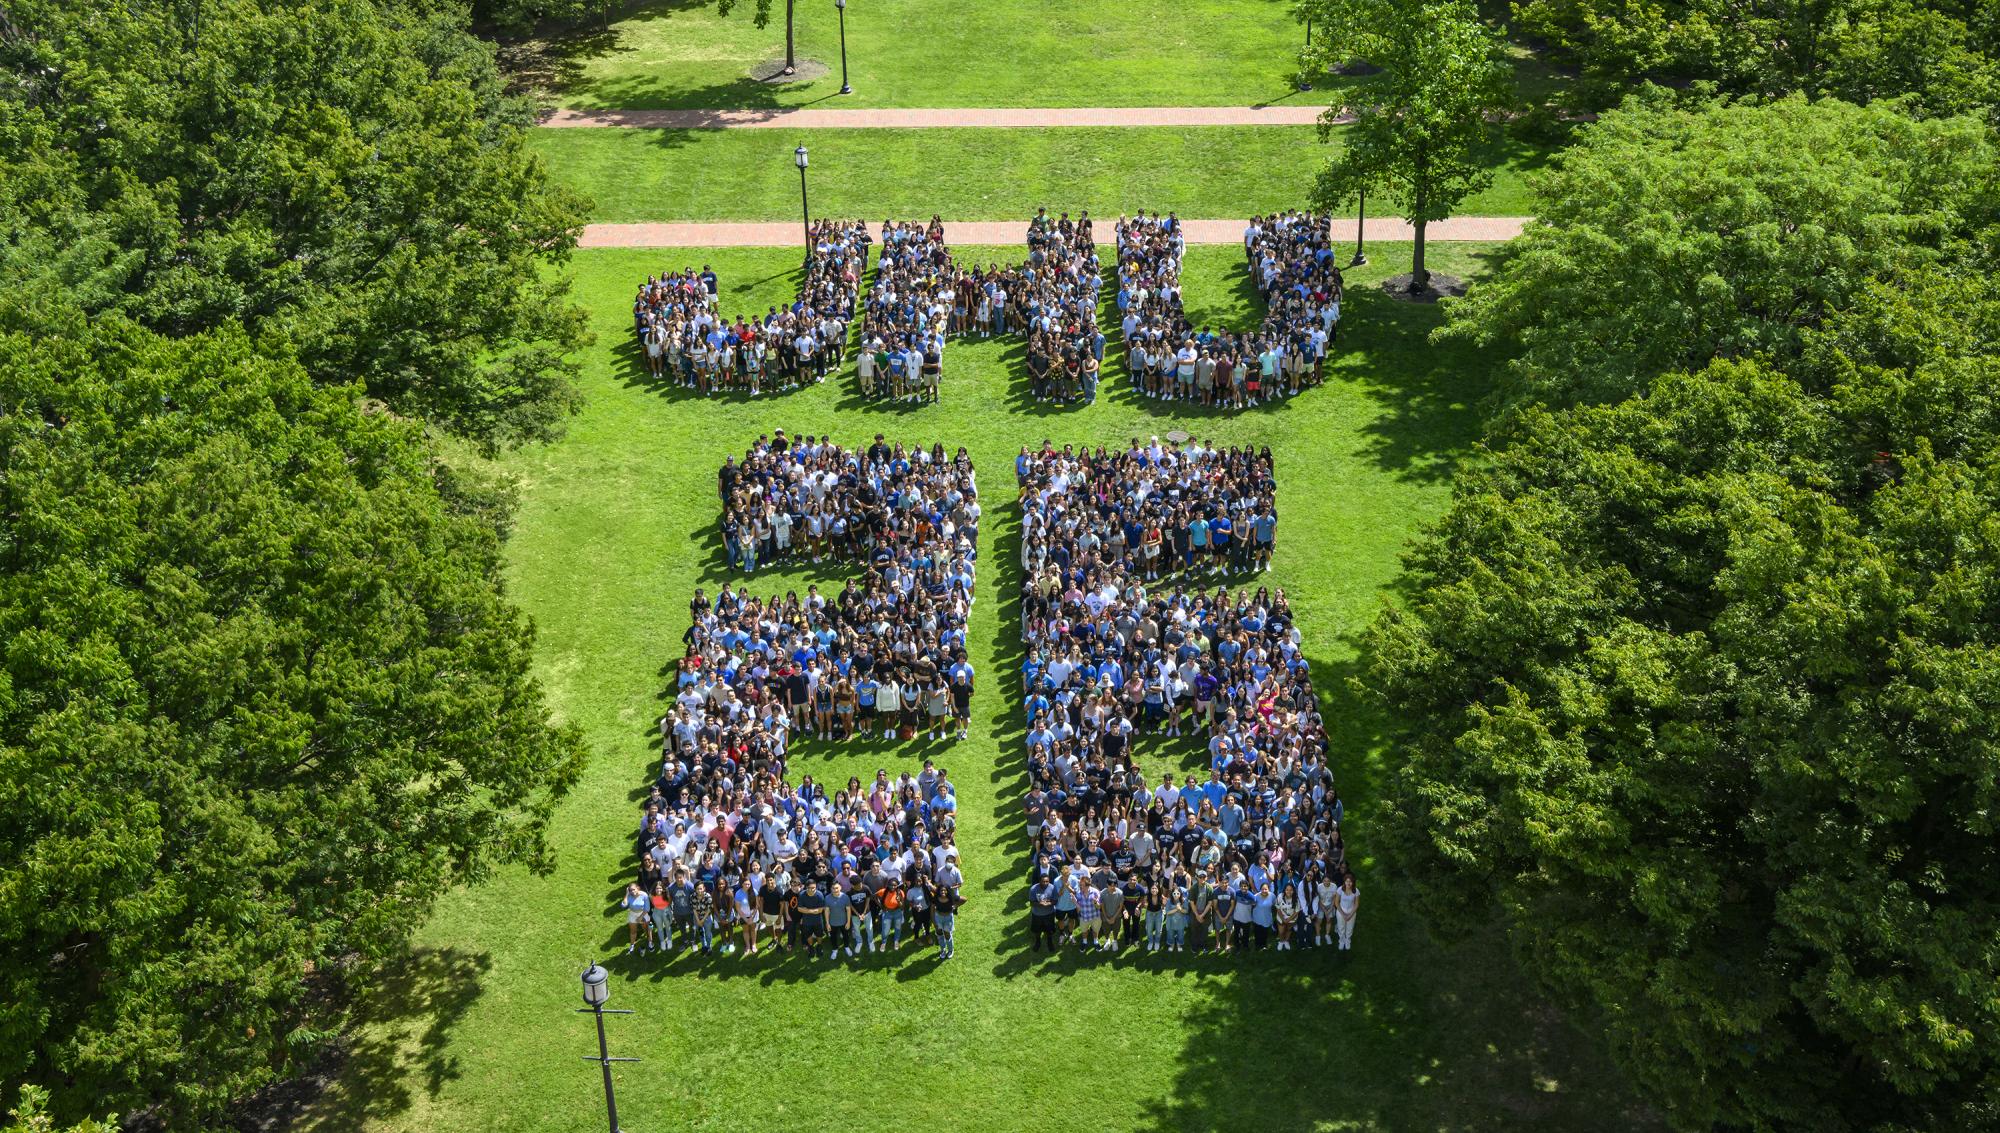 class-of-2026-officially-joins-johns-hopkins-student-body-hub